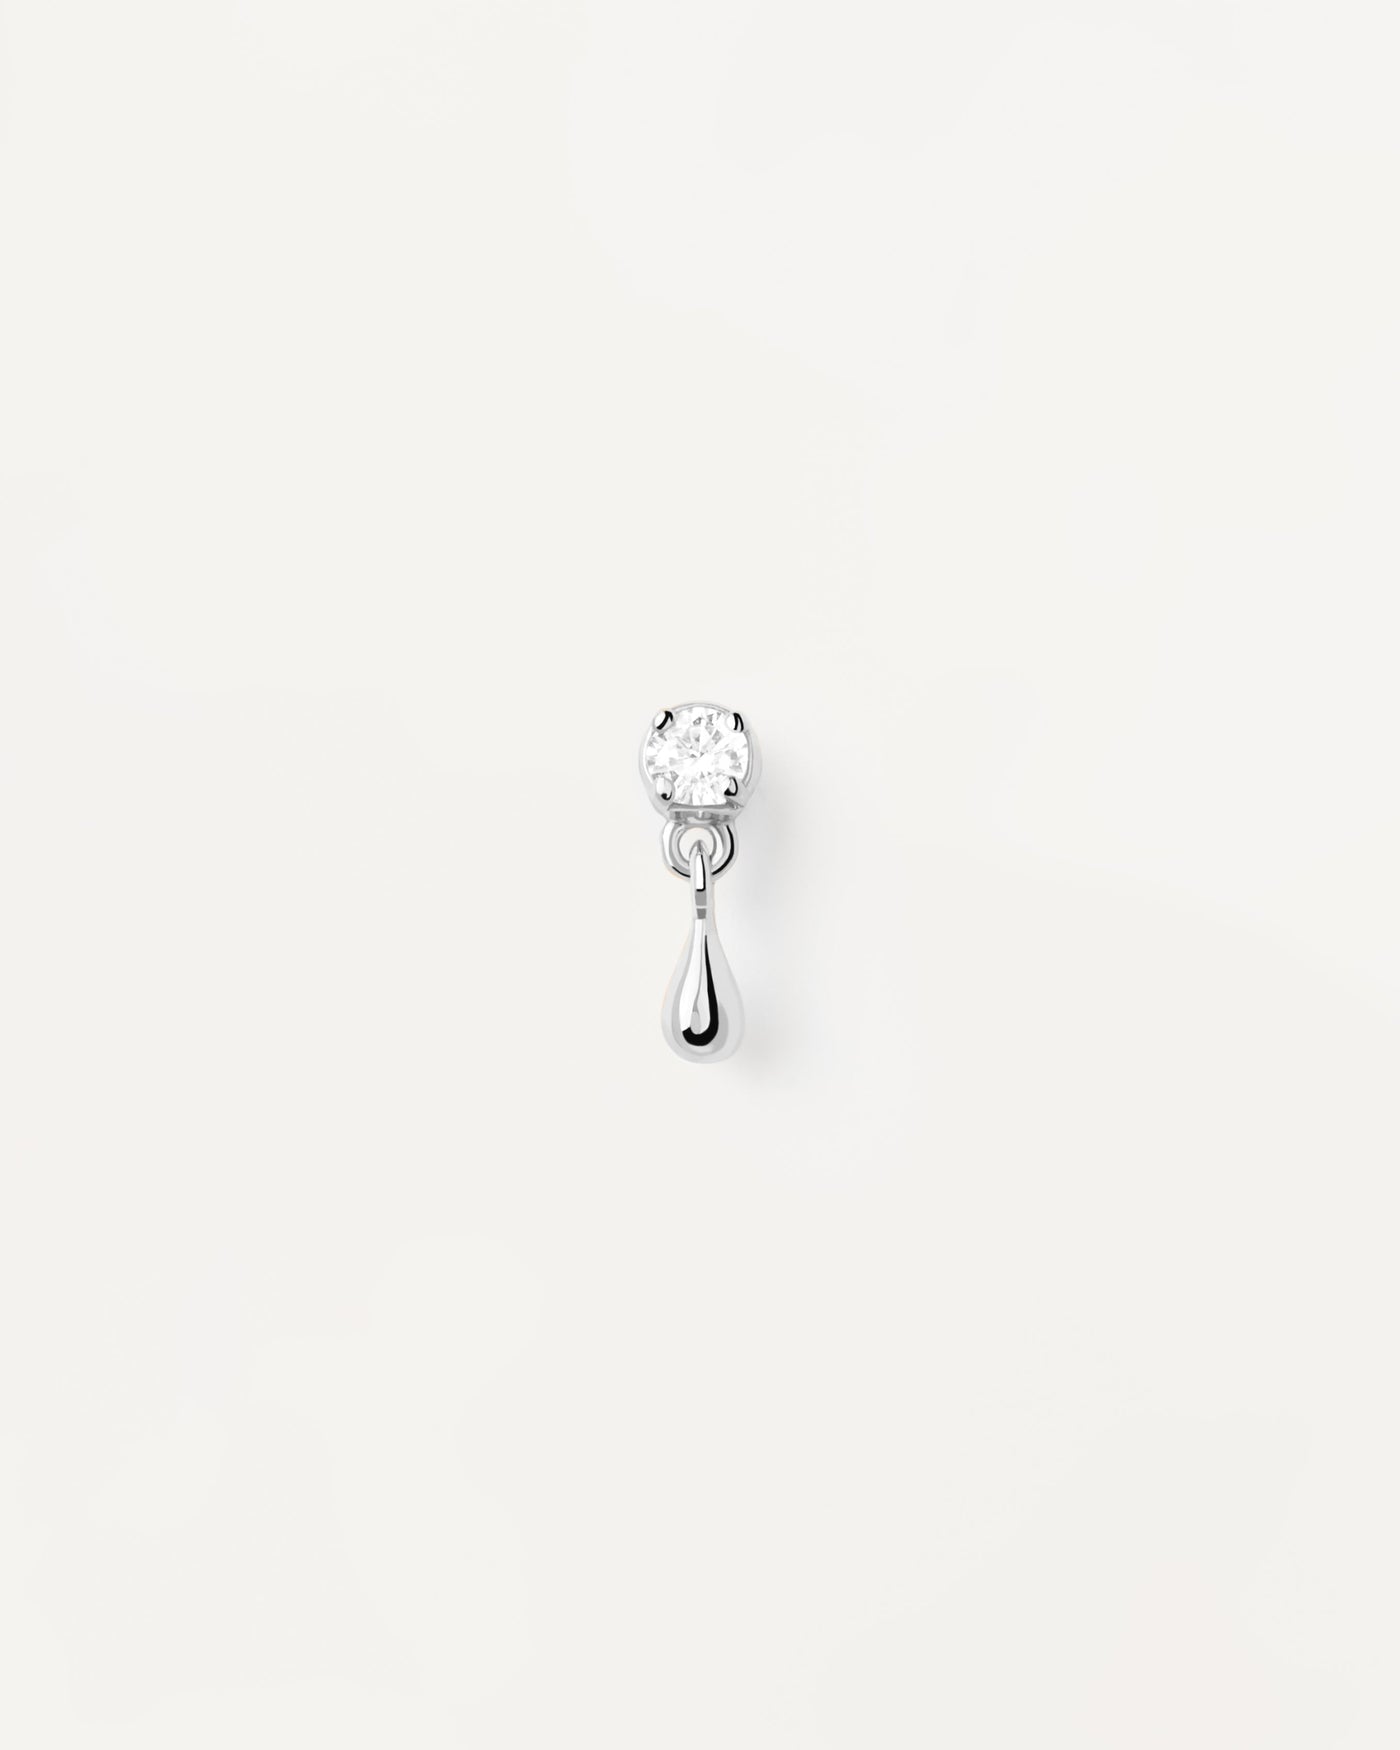 2023 Selection | Water silver single stud Earring. Sterling silver ear piercing with white zirconia and small drop pendant. Get the latest arrival from PDPAOLA. Place your order safely and get this Best Seller. Free Shipping.